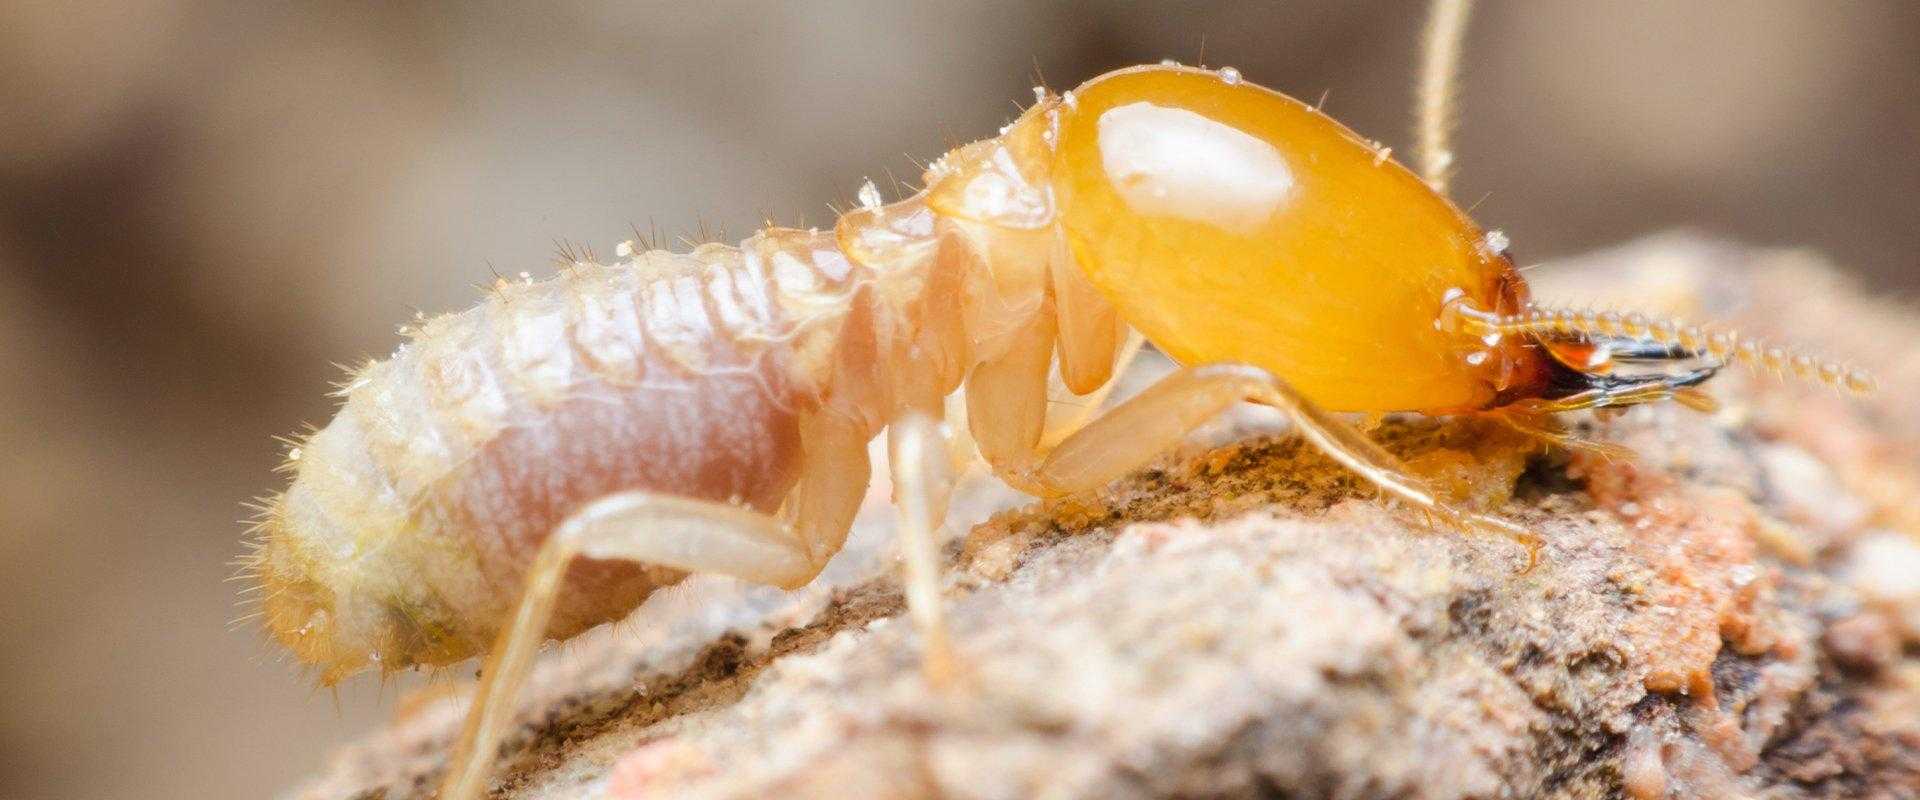 termite on mound in south florida